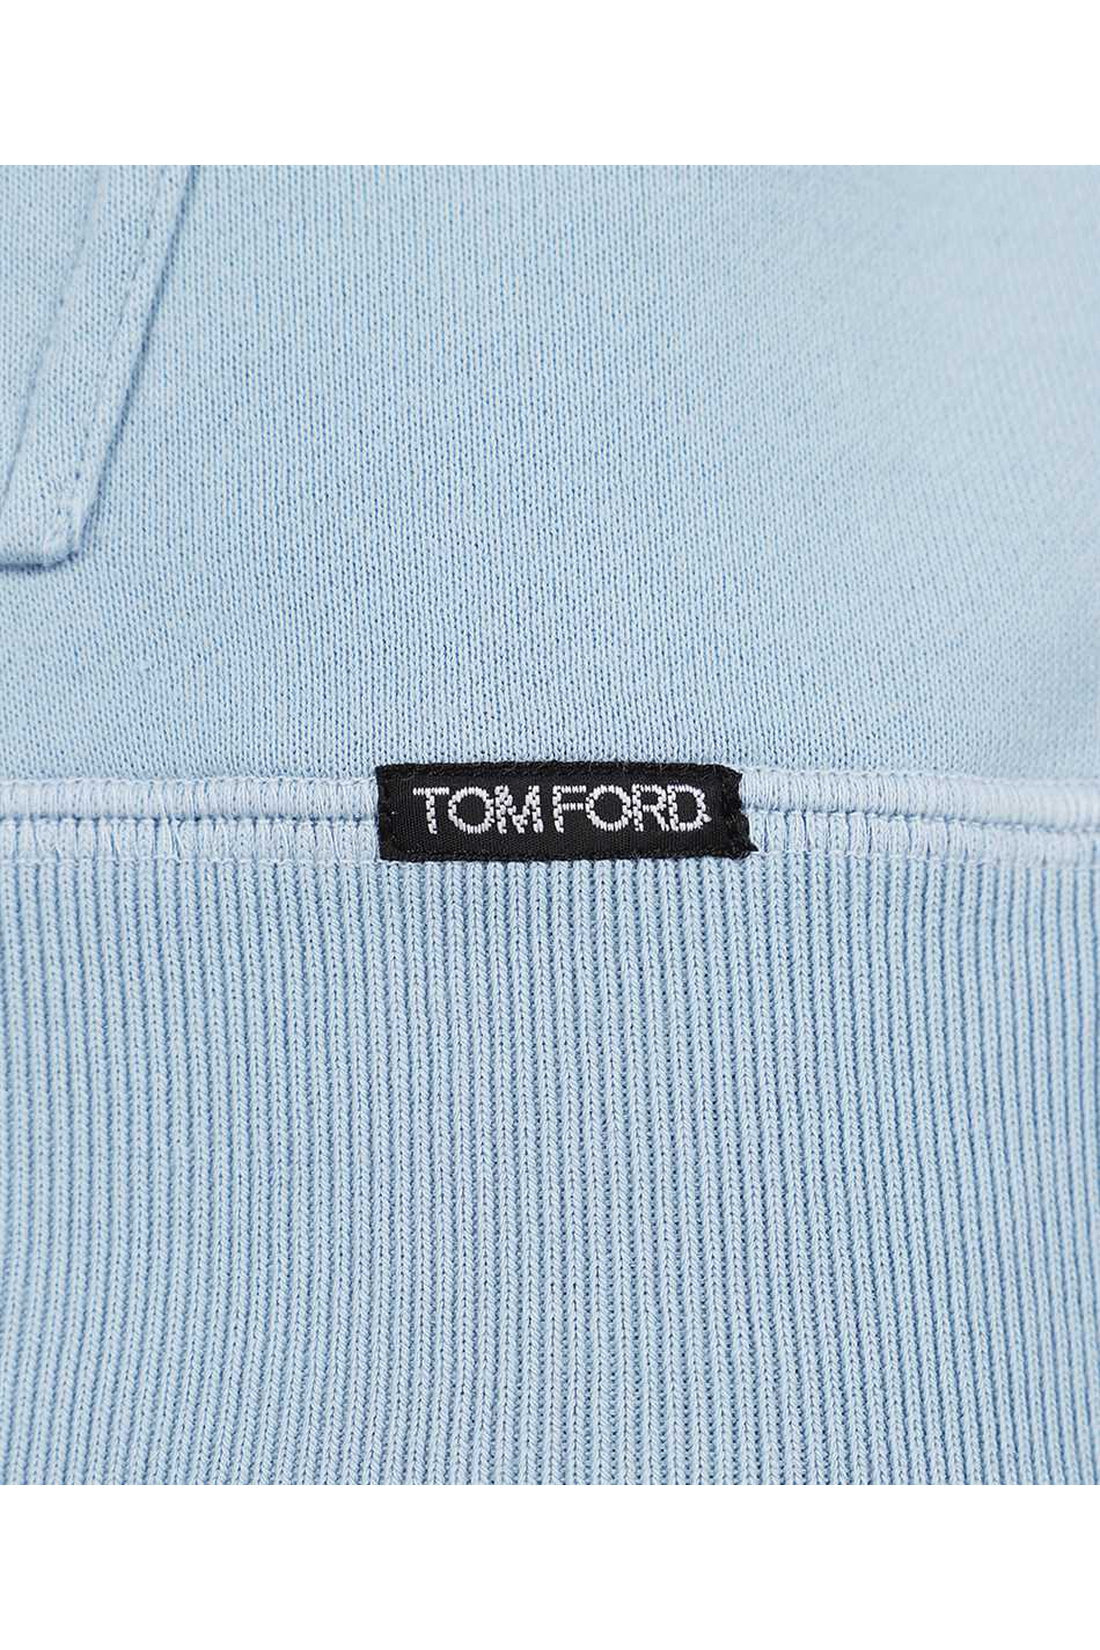 Tom Ford-OUTLET-SALE-Edy hooded wool sweater-ARCHIVIST